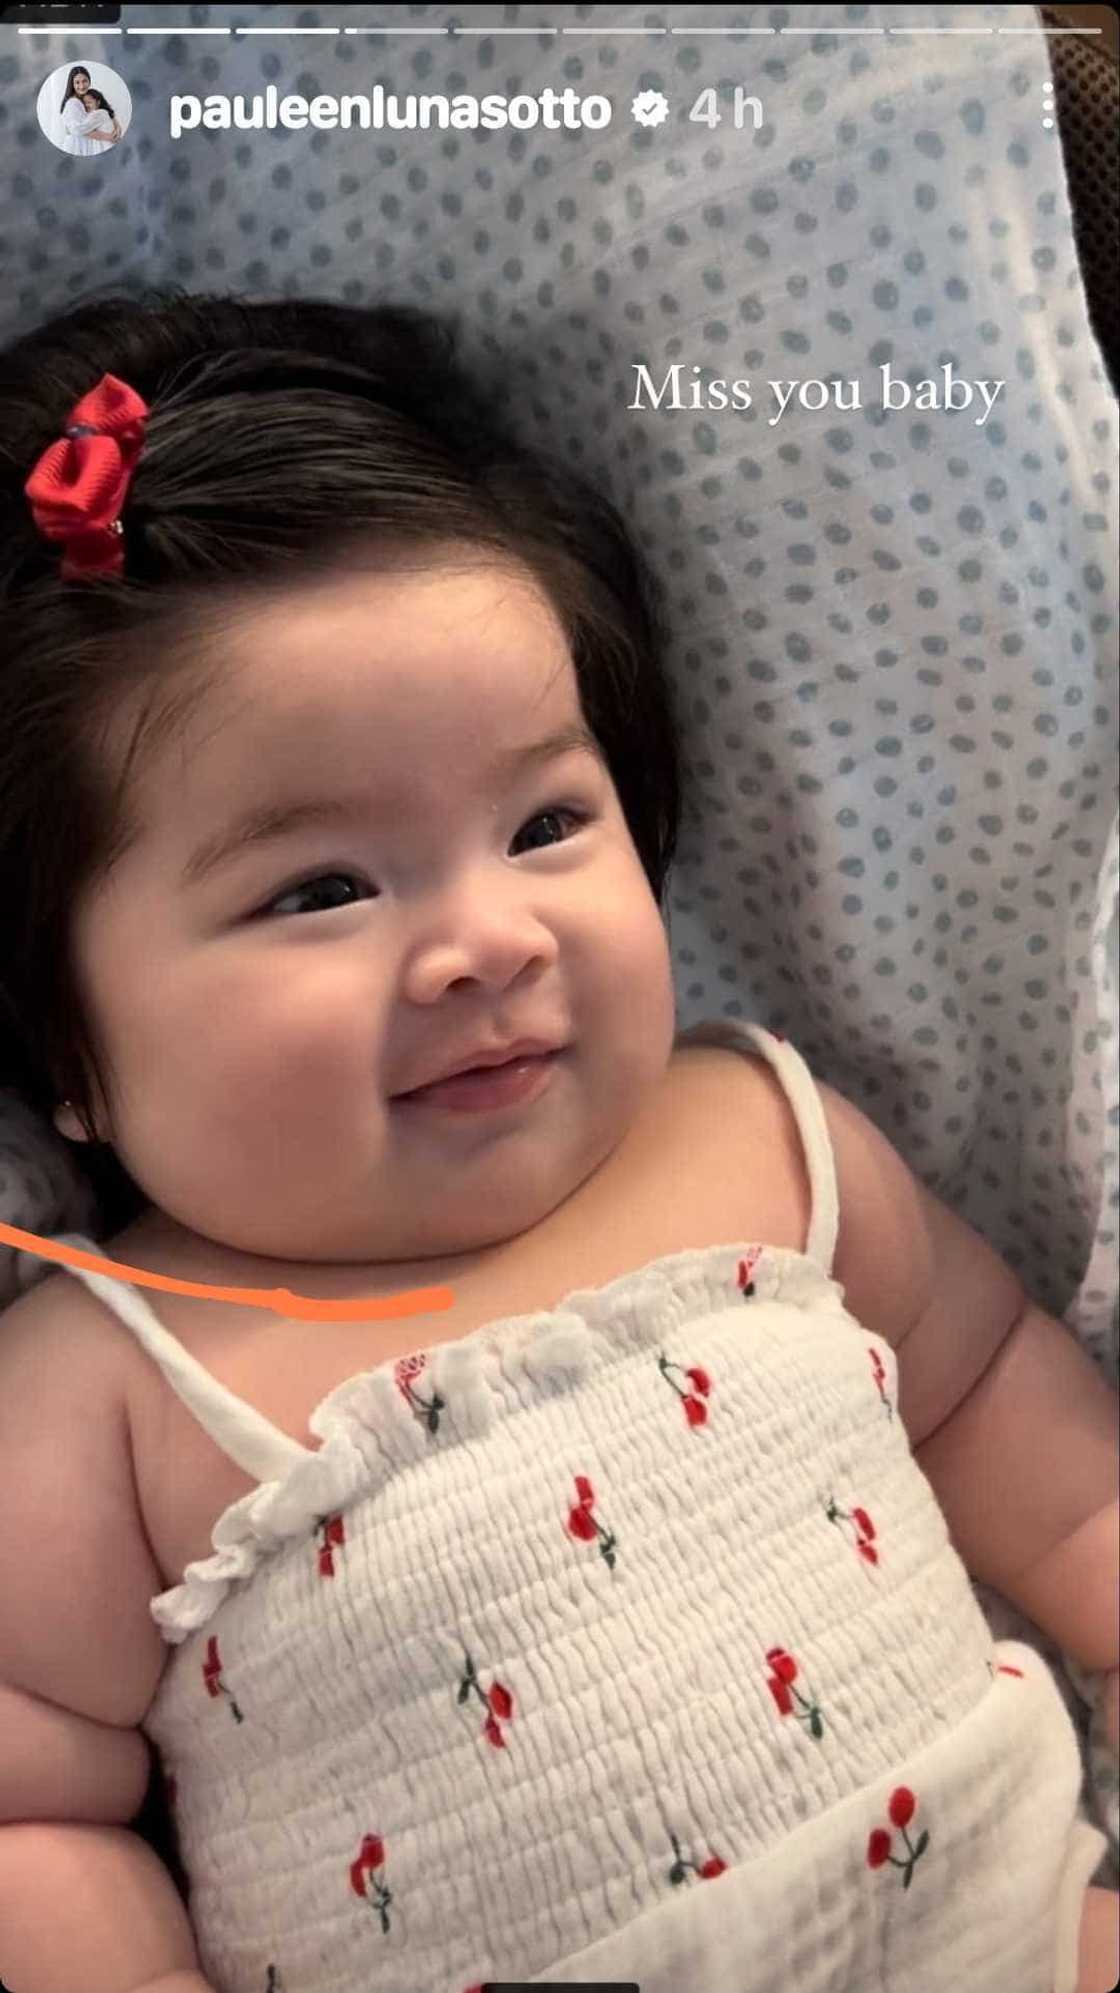 Pauleen Luna shares heartwarming video call moment with Baby Mochi